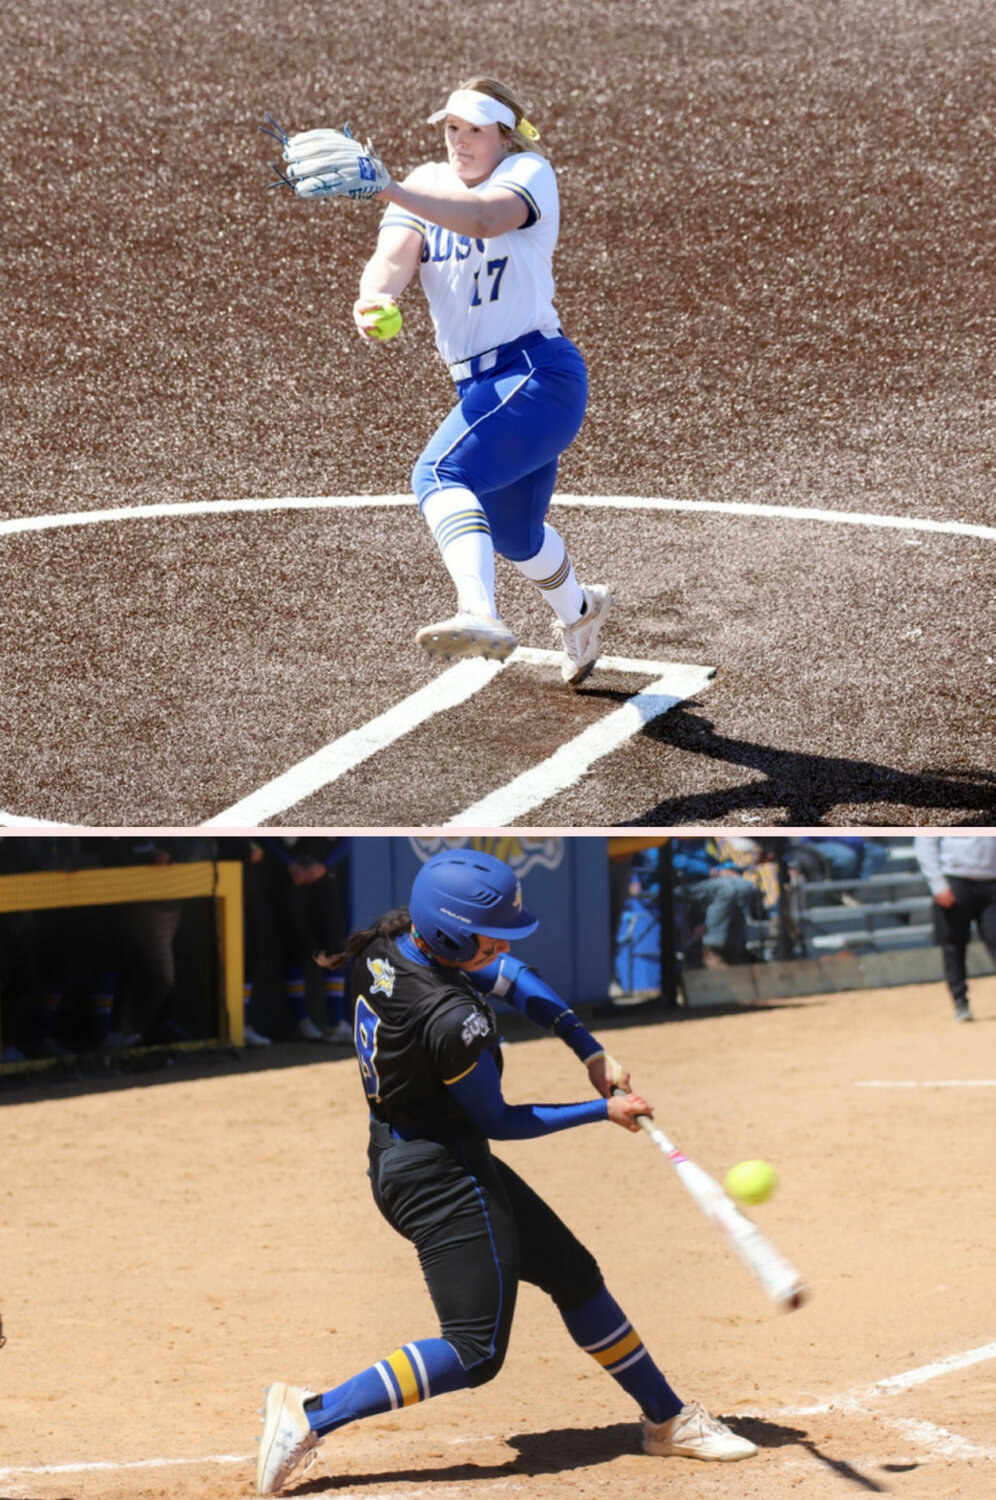 TOP: South Dakota State pitcher Tori Kniesche delivers during a game against Omaha on April 7. BOTTOM: South Dakota State infielder Jocelyn Carillo swings during a game against North Dakota State on April 17. (Andrew Holtan/Brookings Register)